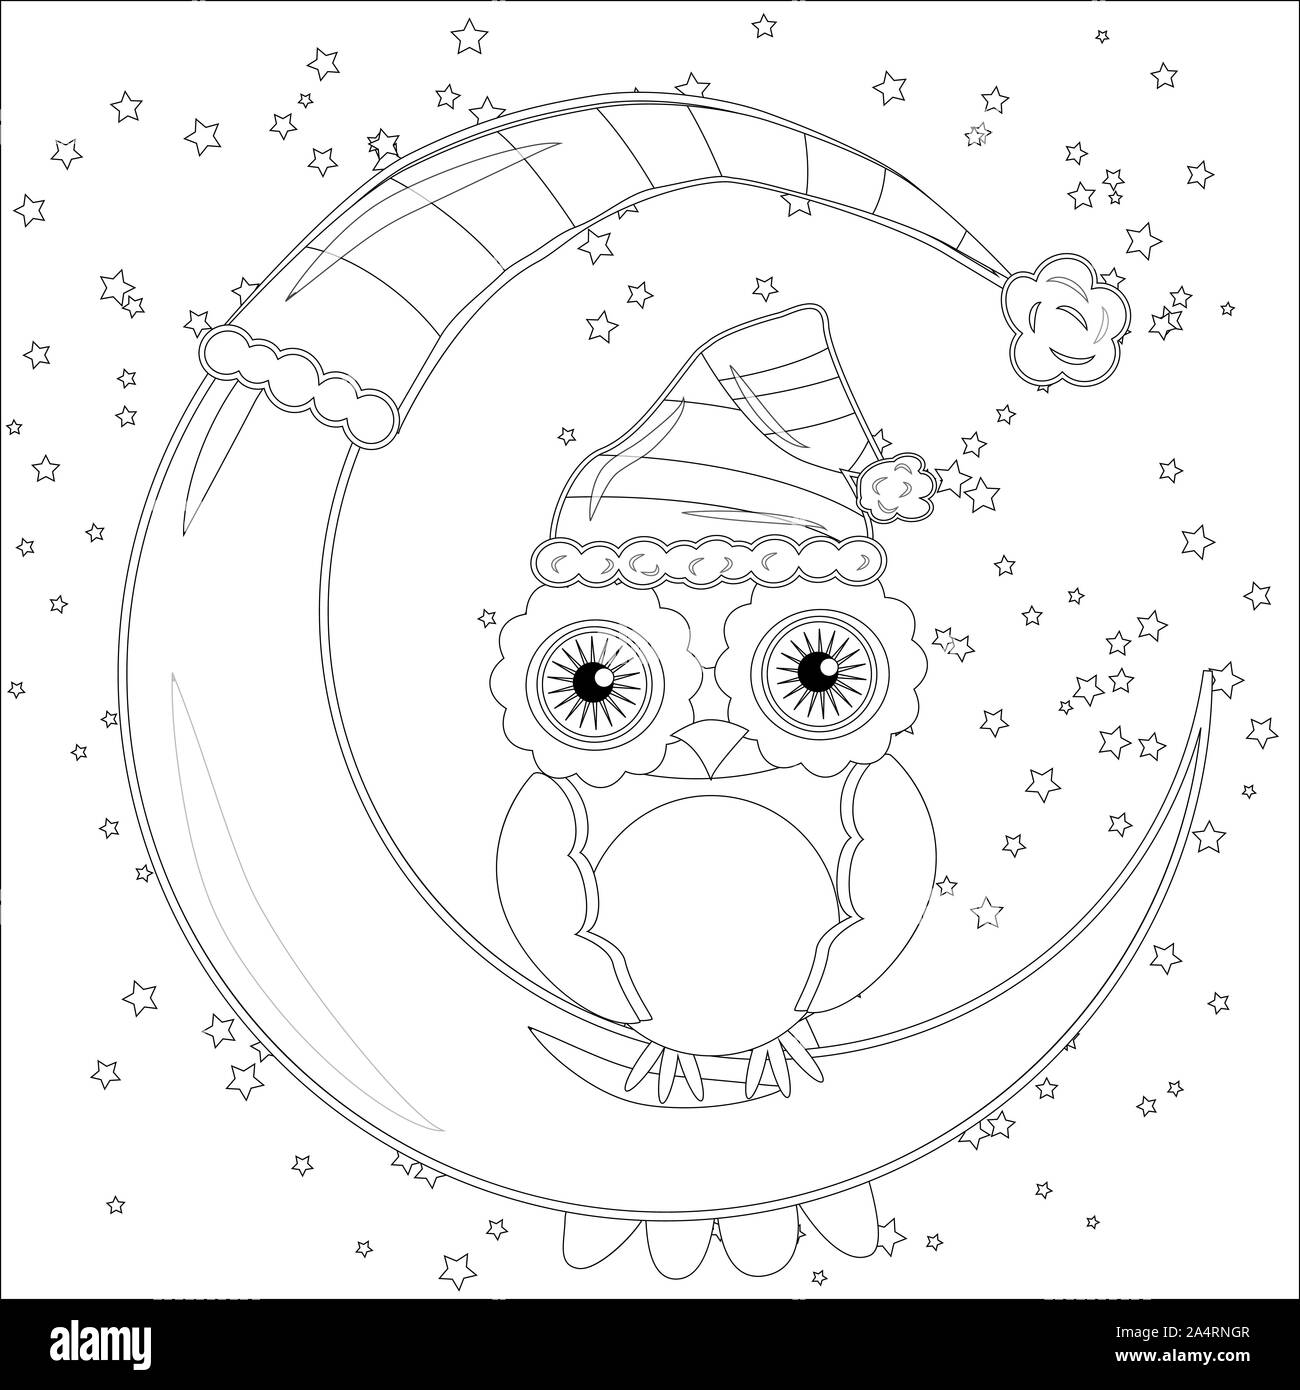 Coloring book for adult and older children. Coloring page with an owl ...